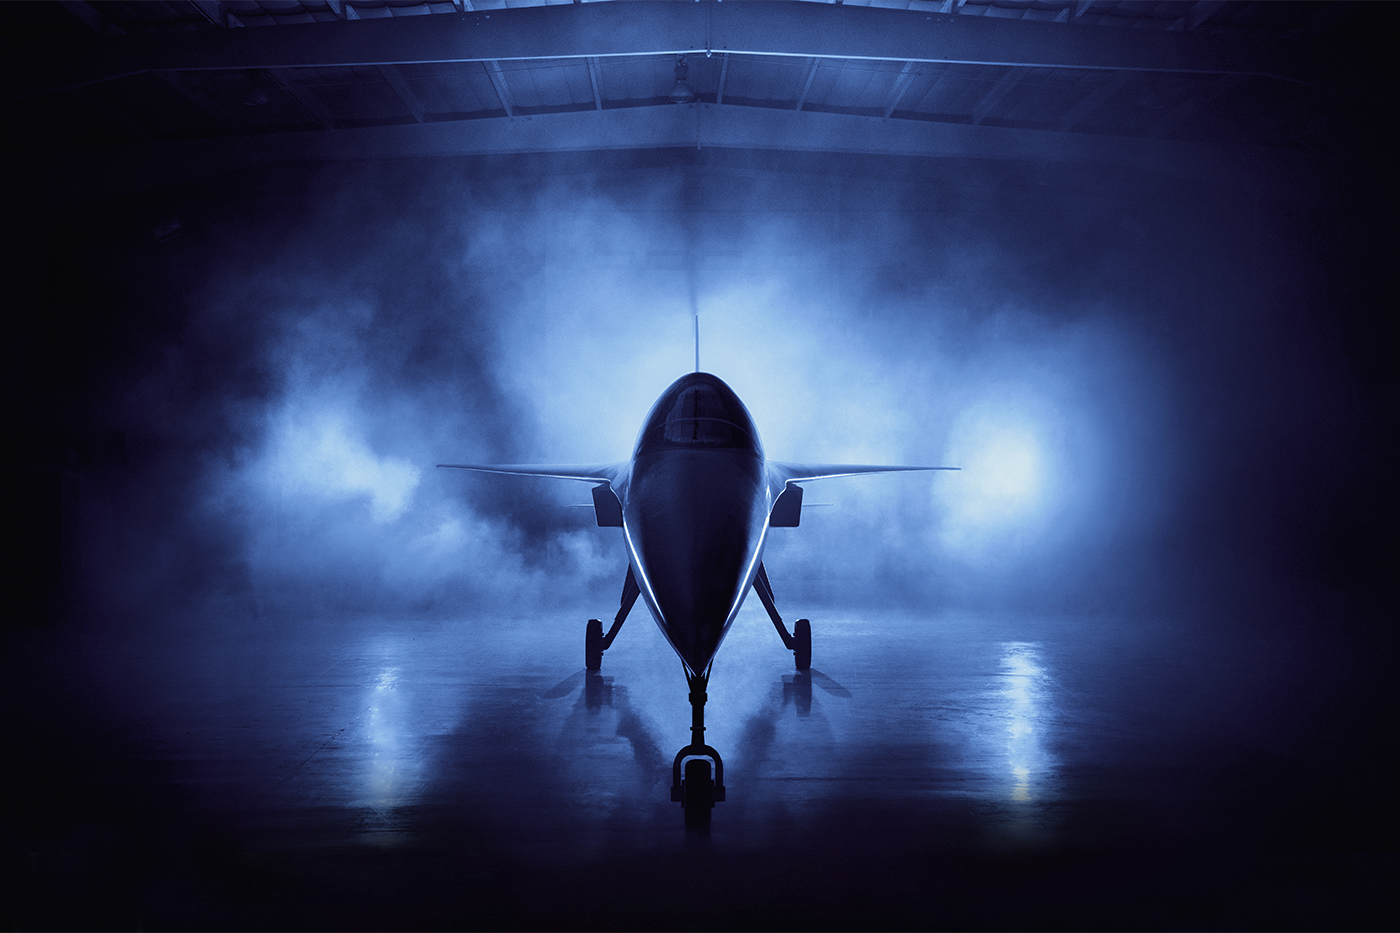 A supersonic airplane sits in a hangar surrounded by fog and illuminated by blue light.